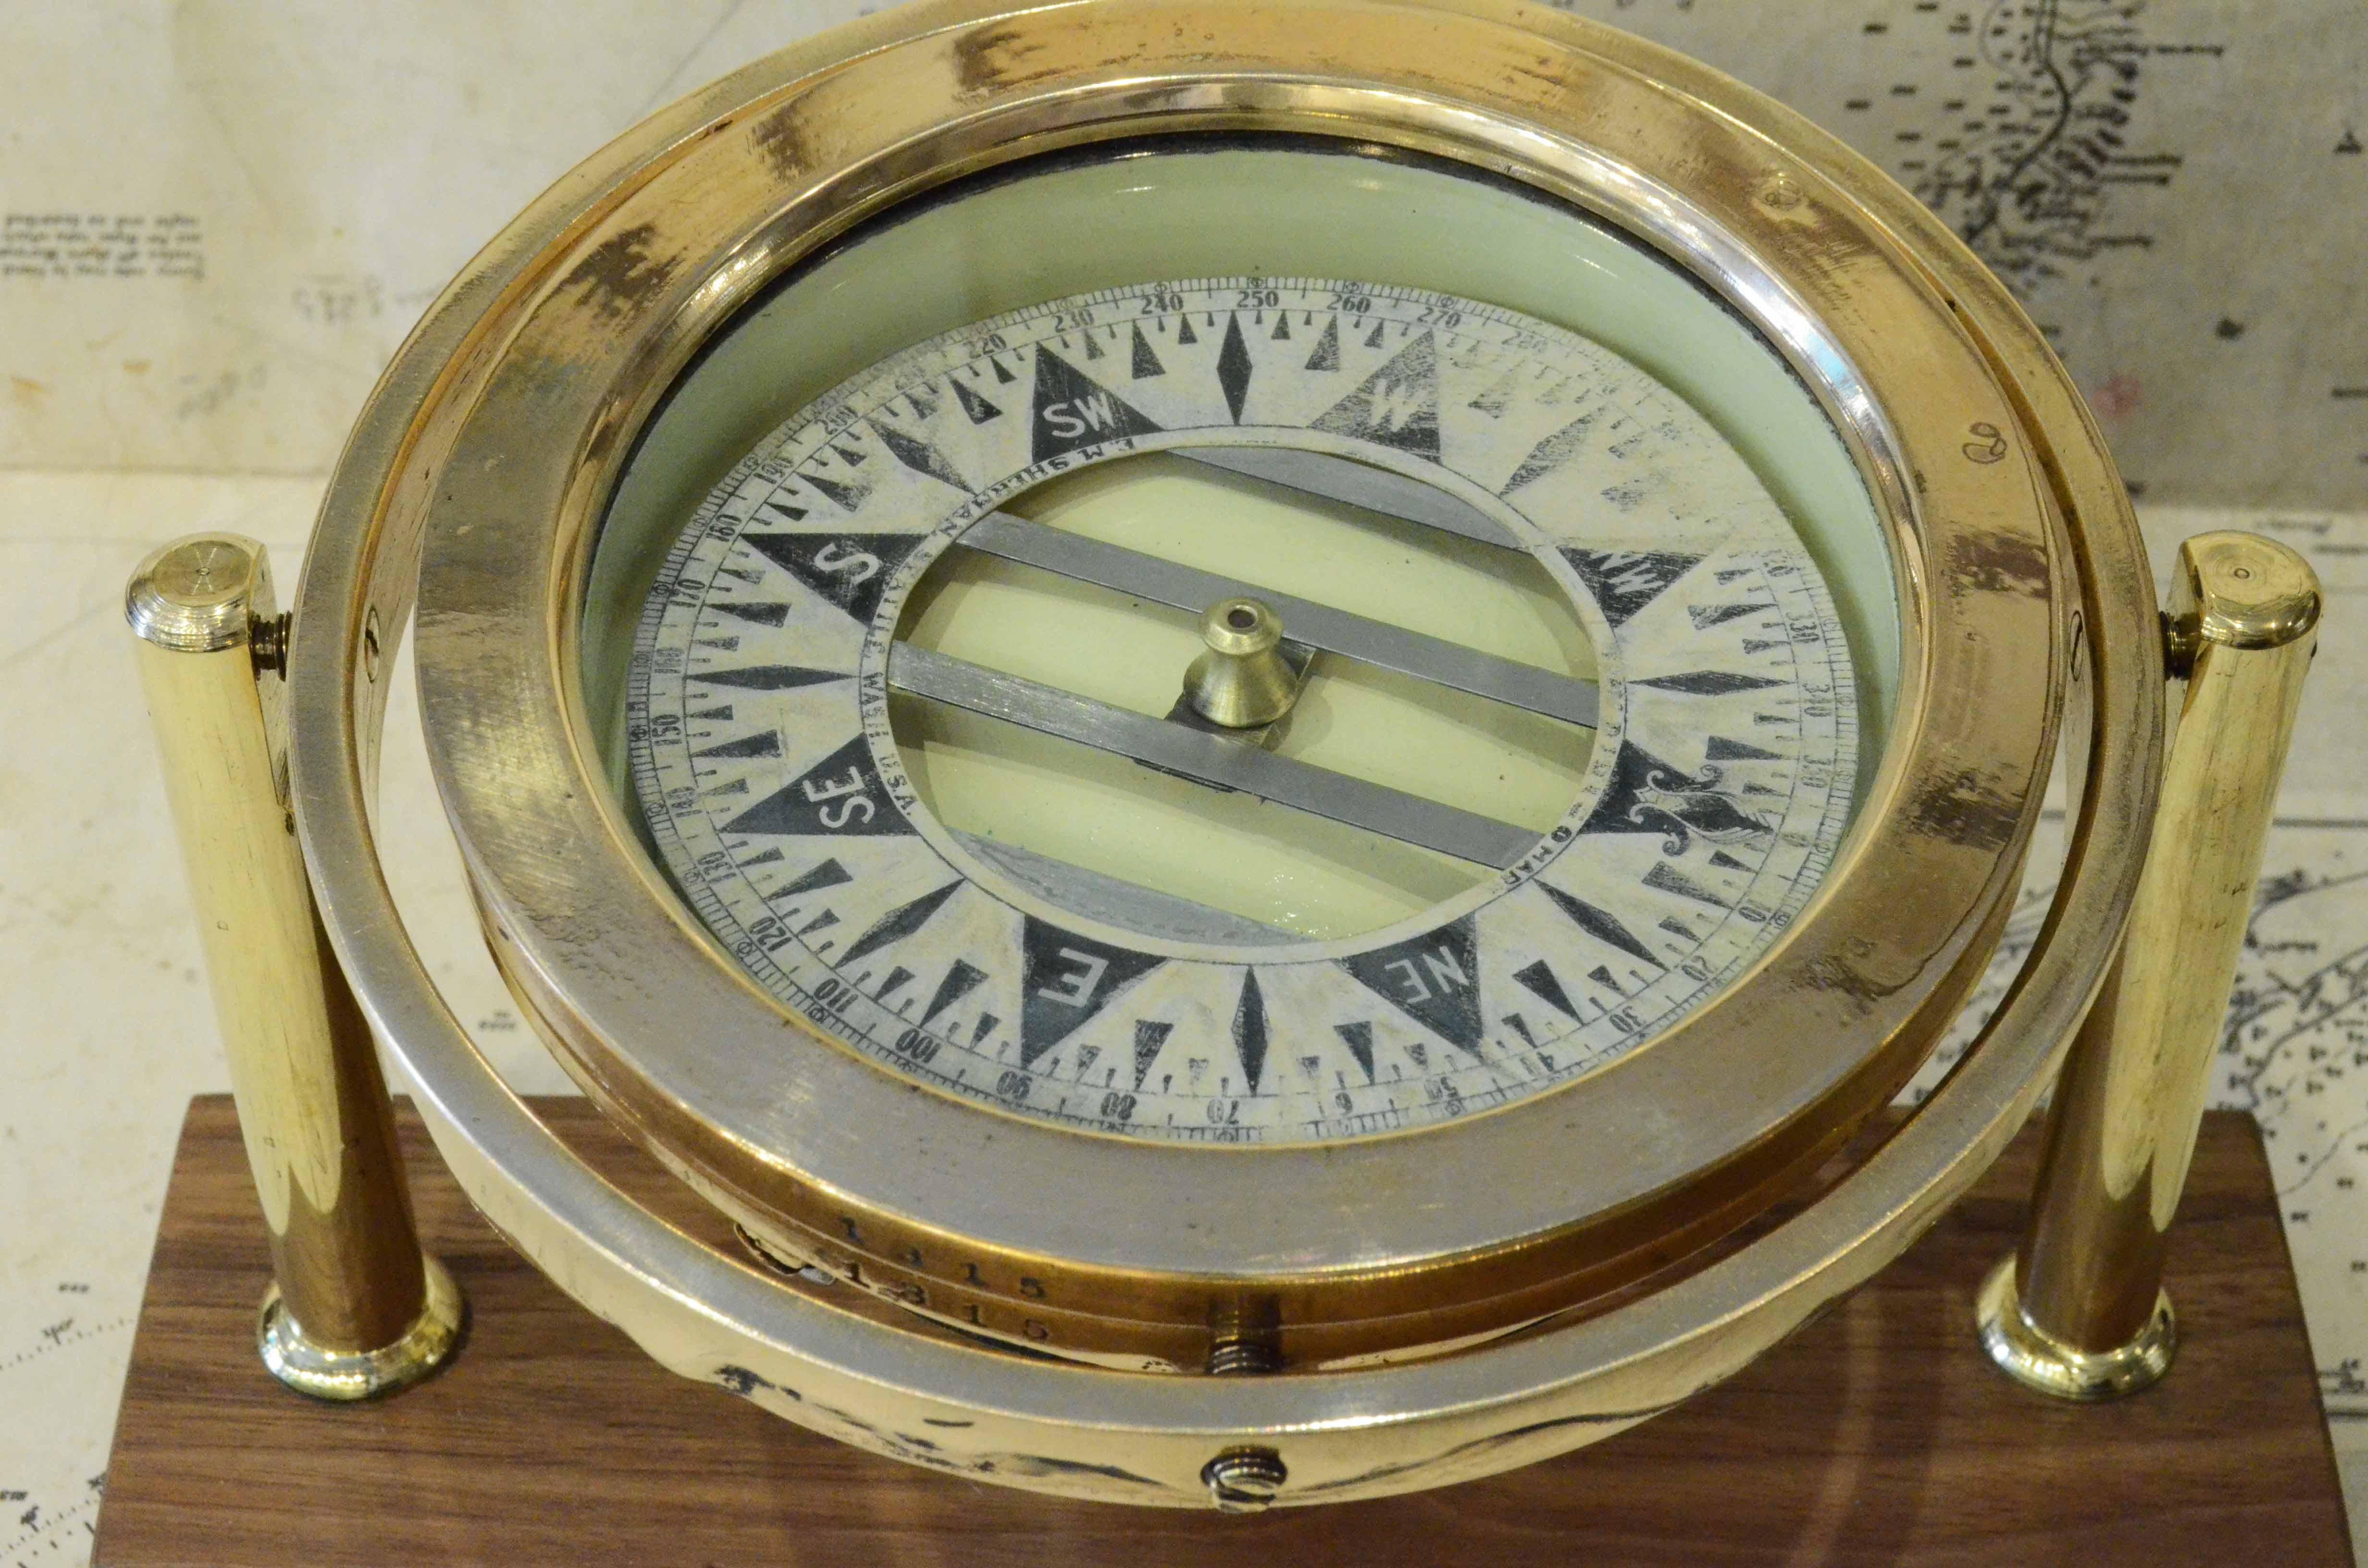 Nautical compass on gimbal signed DIRIGO Eugen M. Sherman Seattle USA 1920s, mounted on custom-made walnut and brass board. Eight-twenty rose complete with protractor circle. The compass consists of a cylindrical brass and bronze container, called a